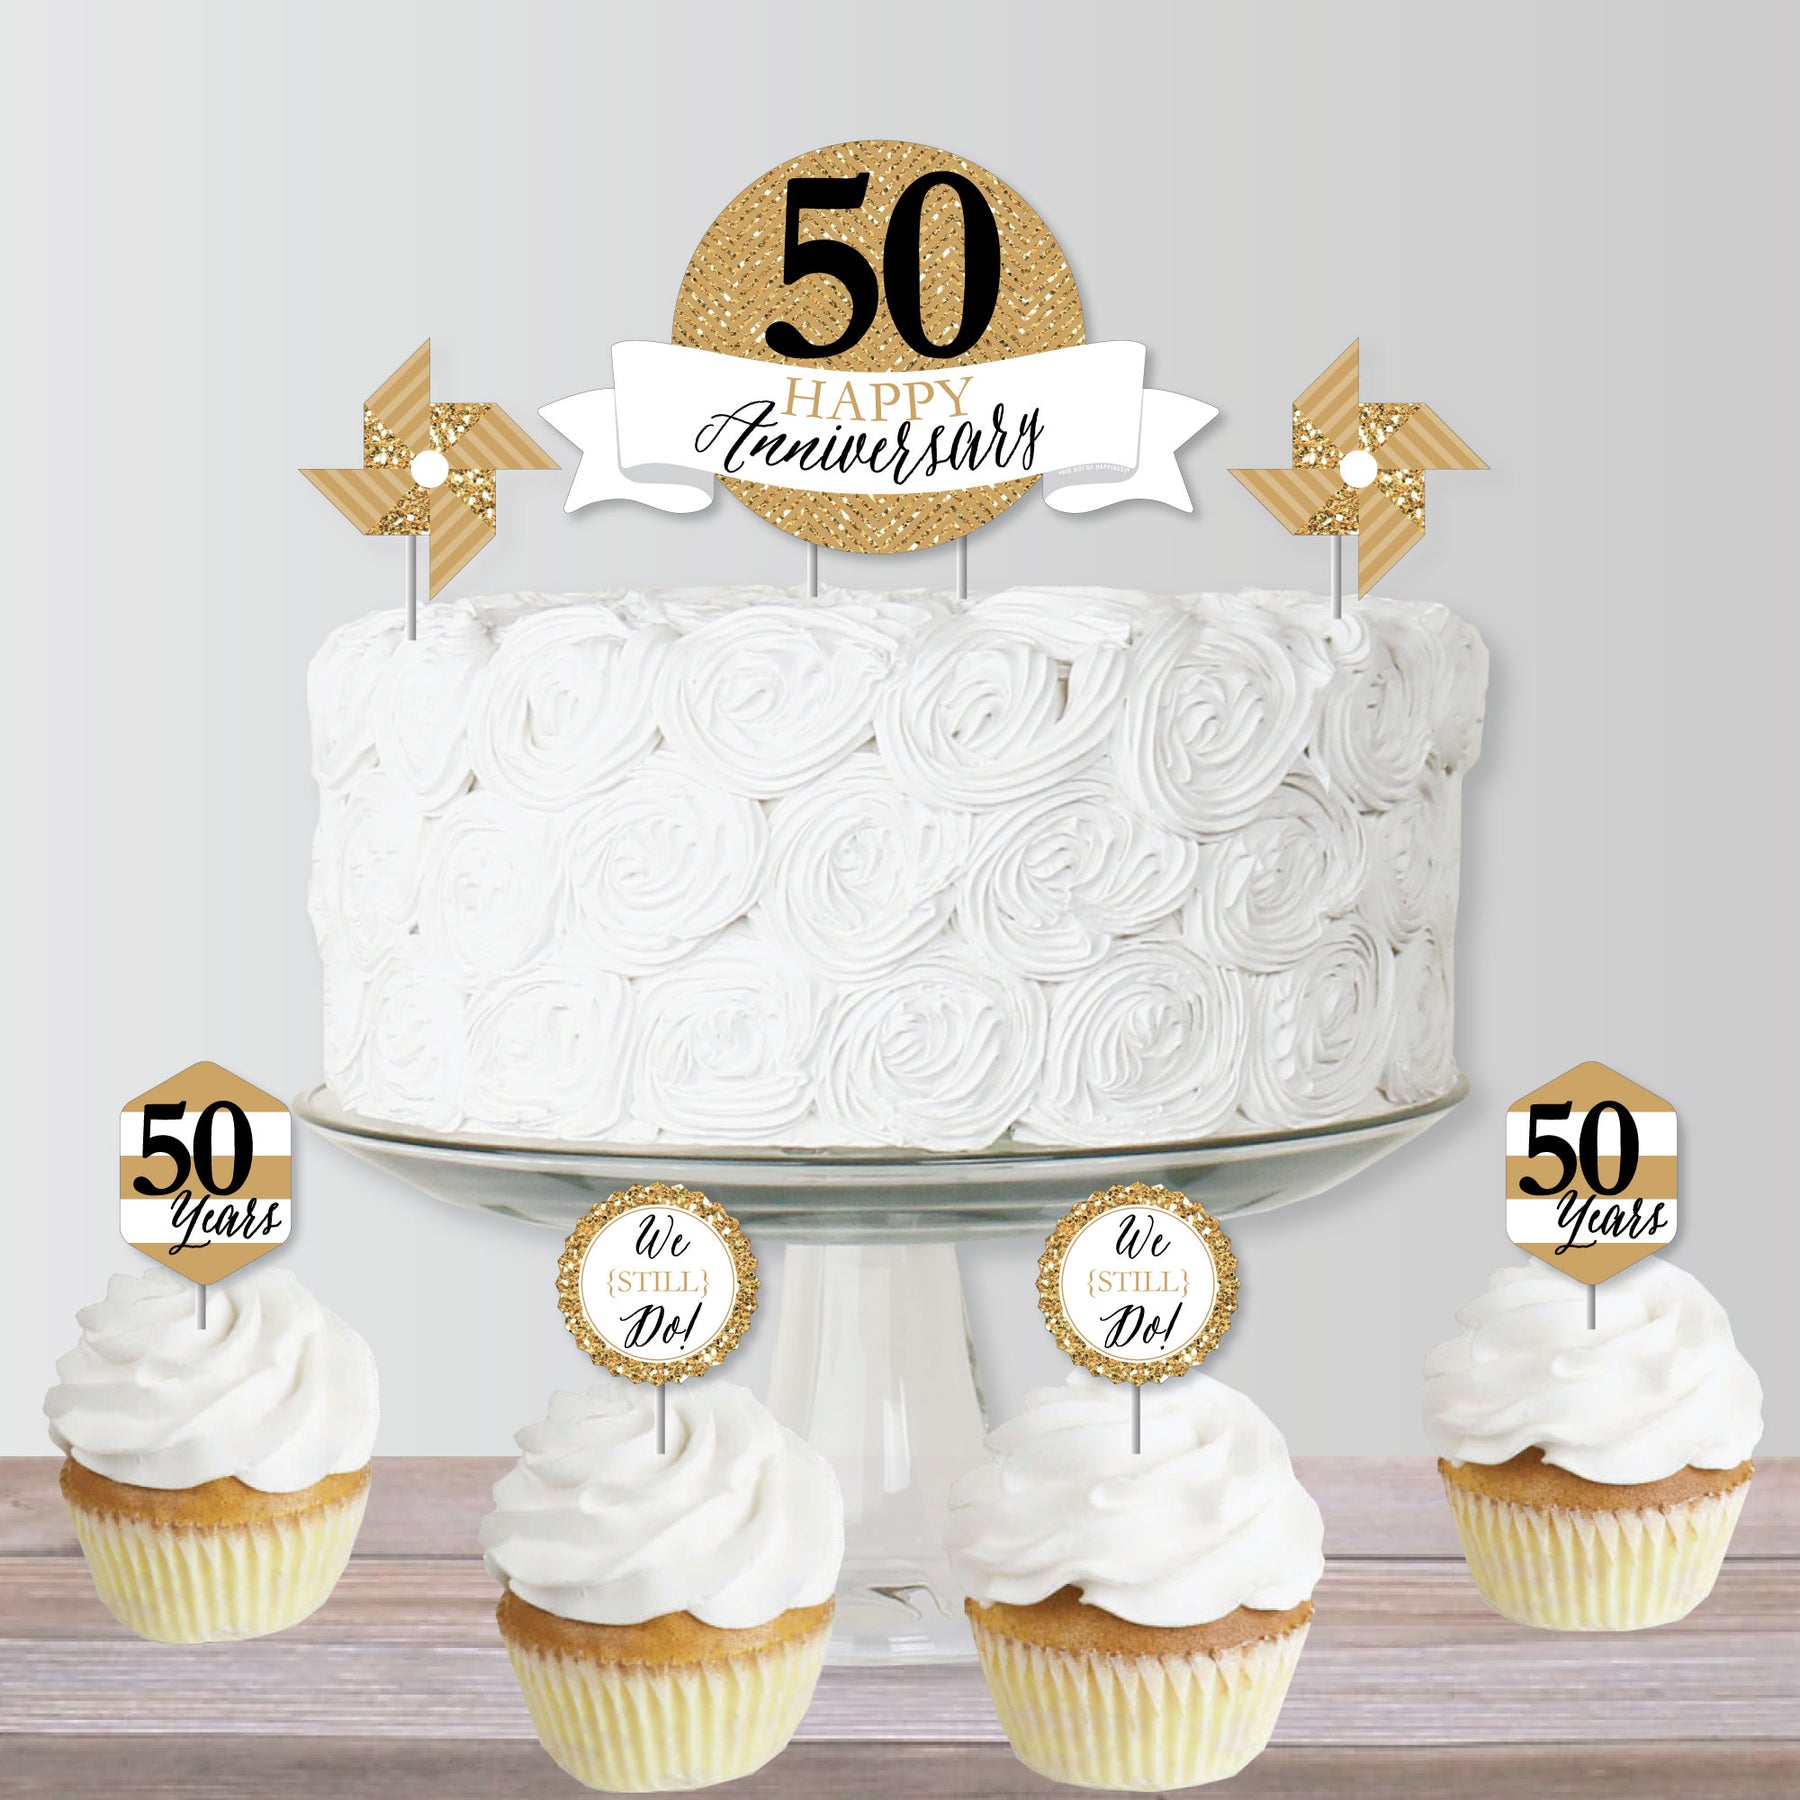 Happy 50th Birthday or 50th Anniversary Cake Topper